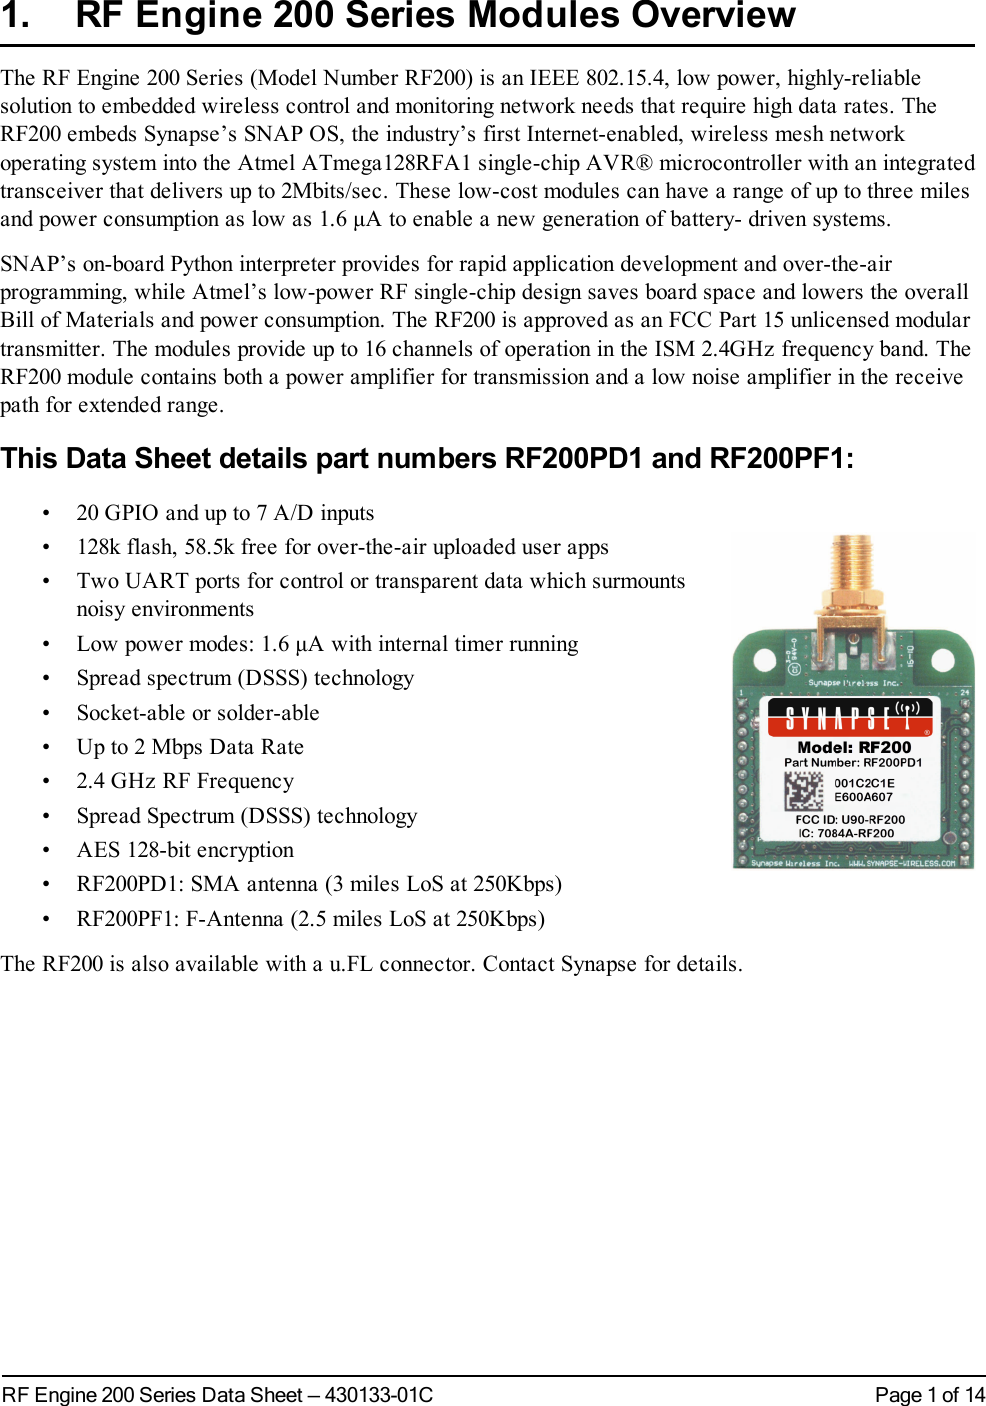 Page 1 of 14RF Engine 200 Series Data Sheet — 430133-01C1. RF Engine 200 Series Modules OverviewThe RF Engine 200 Series (Model Number RF200) is an IEEE 802.15.4, low power, highly-reliablesolution to embedded wireless control and monitoring network needs that require high data rates. TheRF200 embeds Synapse’s SNAP OS, the industry’s first Internet-enabled, wireless mesh networkoperating system into the Atmel ATmega128RFA1 single-chip AVR® microcontroller with an integratedtransceiver that delivers up to 2Mbits/sec. These low-cost modules can have a range of up to three milesand power consumption as low as 1.6 μA to enable a new generation of battery- driven systems.SNAP’s on-board Python interpreter provides for rapid application development and over-the-airprogramming, while Atmel’s low-power RF single-chip design saves board space and lowers the overallBill of Materials and power consumption. The RF200 is approved as an FCC Part 15 unlicensed modulartransmitter. The modules provide up to 16 channels of operation in the ISM 2.4GHz frequency band. TheRF200 module contains both a power amplifier for transmission and a low noise amplifier in the receivepath for extended range.This Data Sheet details part numbers RF200PD1 and RF200PF1:• 20 GPIO and up to 7 A/D inputs• 128k flash, 58.5k free for over-the-air uploaded user apps• Two UART ports for control or transparent data which surmountsnoisy environments• Low power modes: 1.6 μA with internal timer running• Spread spectrum (DSSS) technology• Socket-able or solder-able• Up to 2 Mbps Data Rate• 2.4 GHz RF Frequency• Spread Spectrum (DSSS) technology• AES 128-bit encryption• RF200PD1: SMA antenna (3 miles LoS at 250Kbps)• RF200PF1: F-Antenna (2.5 miles LoS at 250Kbps)The RF200 is also available with a u.FL connector. Contact Synapse for details.